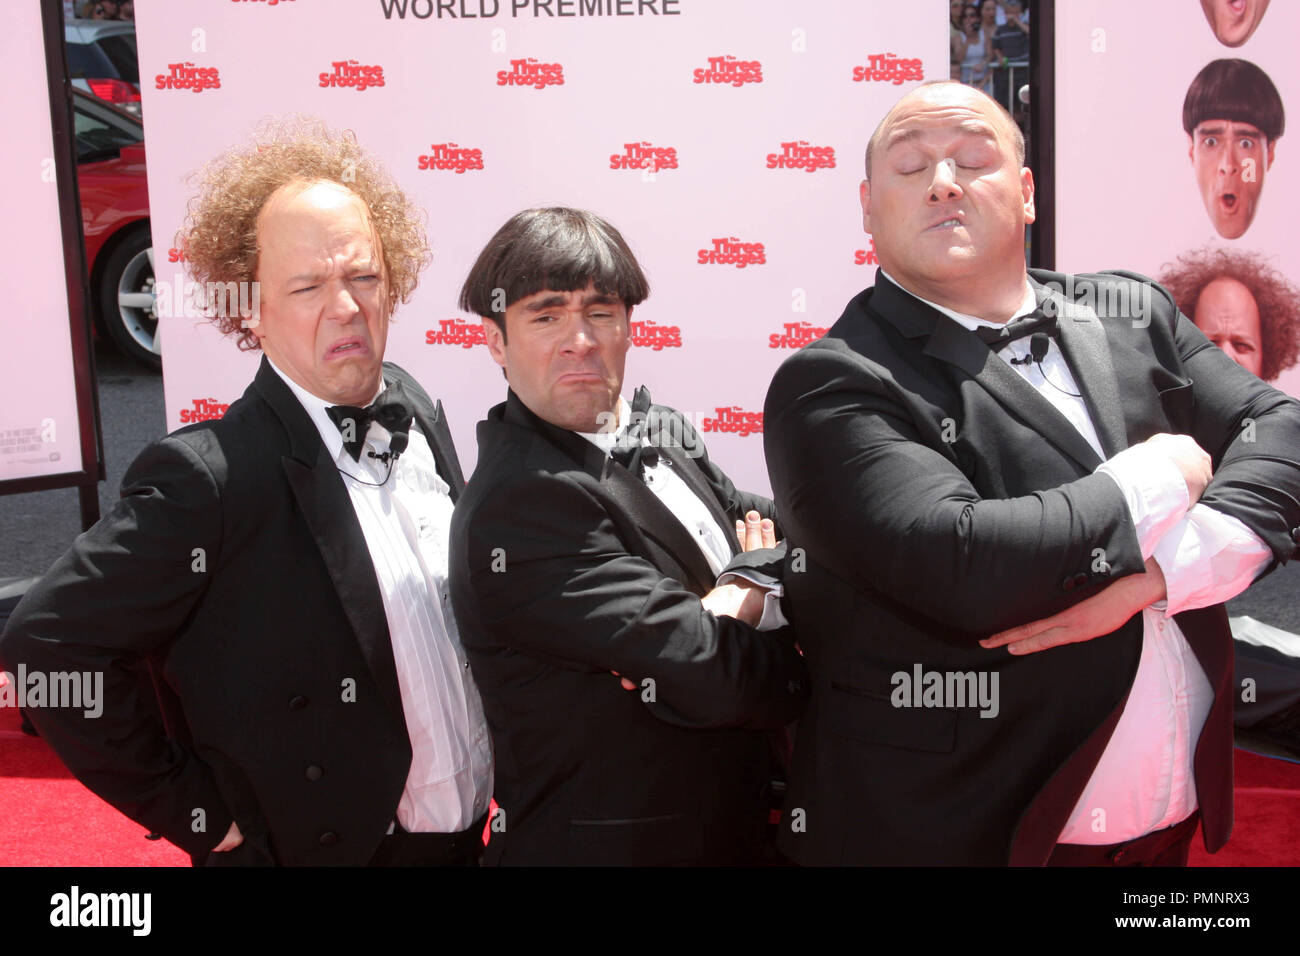 Sean Hayes, Chris Diamantopoulos and Will Sasso as The Three Stooges at the world premiere of 20th Century Fox 'The Three Stooges: The Movie'. Arrivals held at the Graumans Chinese Theater in Hollywood, CA, April 7, 2012. Photo by: Richard Chavez / Picturelux Stock Photo